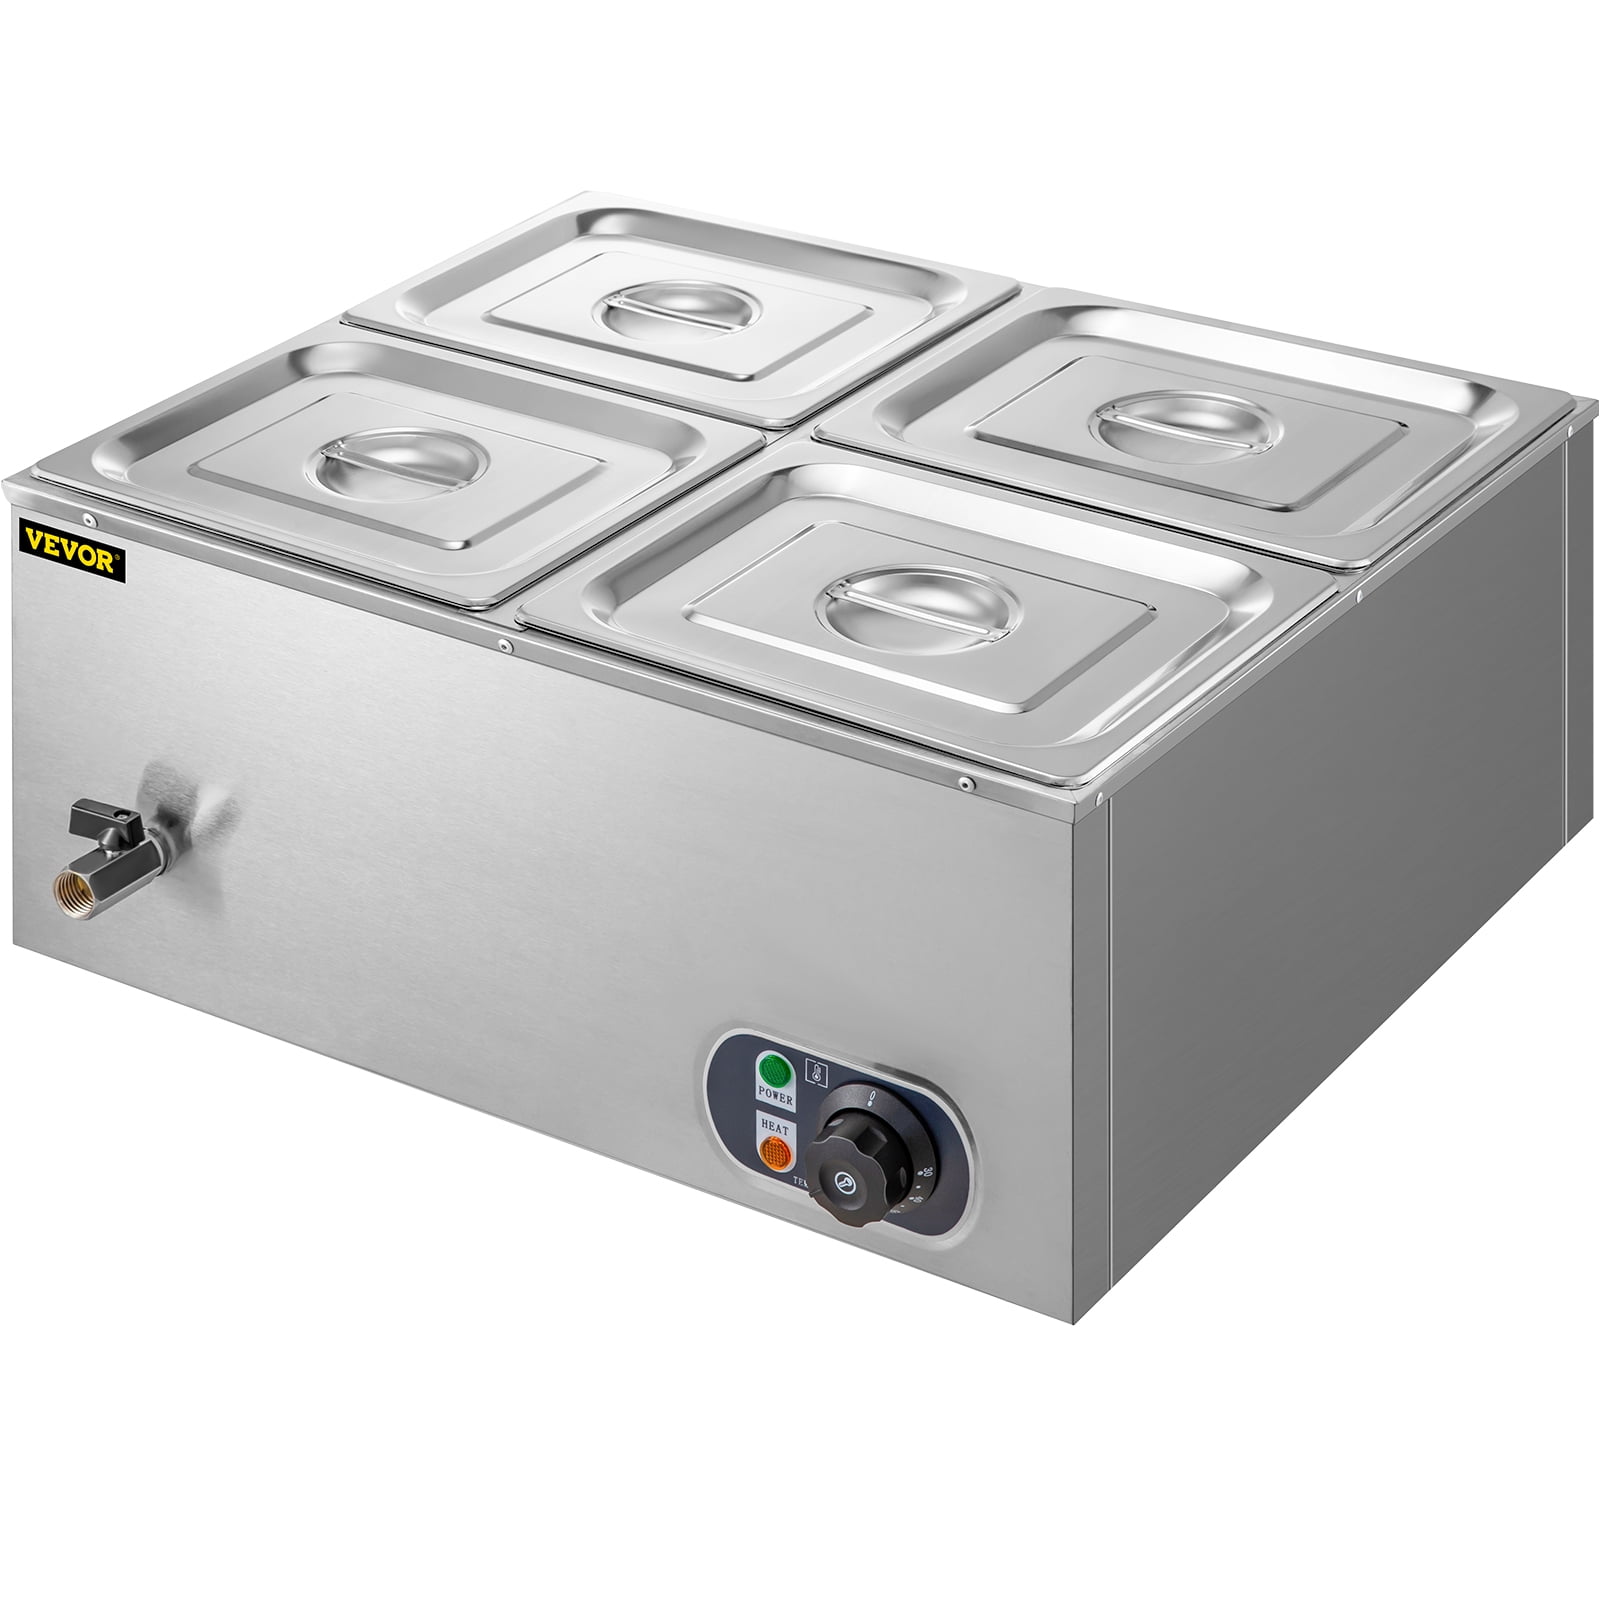 3/5 Pan Wet Well Bain Marie Stainless Steel Gastronorm Pan Commercial Catering 